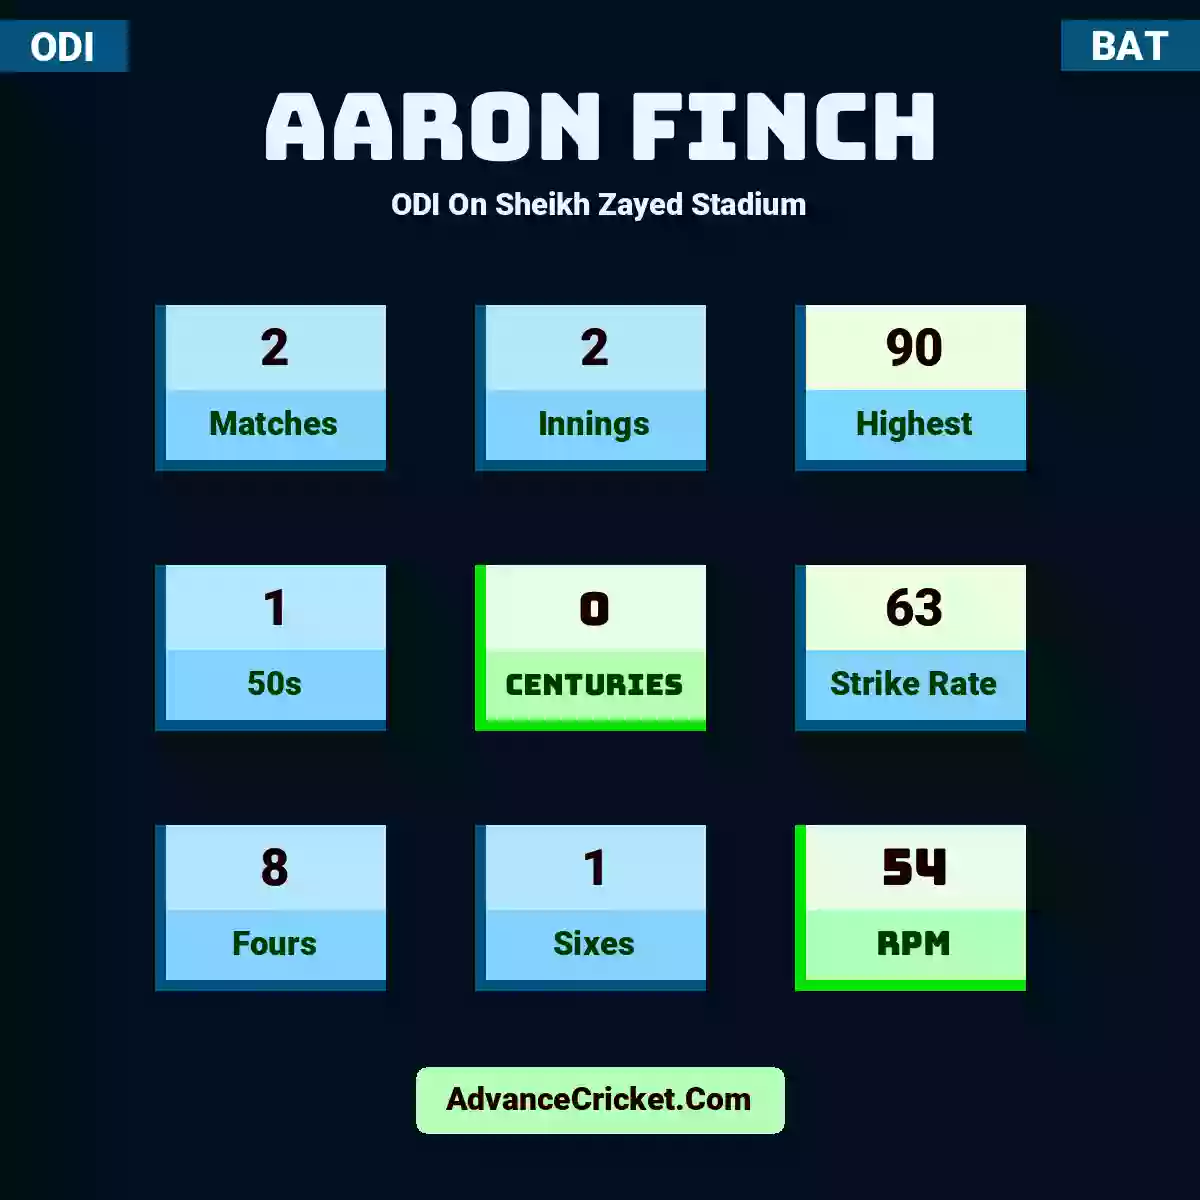 Aaron Finch ODI  On Sheikh Zayed Stadium, Aaron Finch played 2 matches, scored 90 runs as highest, 1 half-centuries, and 0 centuries, with a strike rate of 63. A.Finch hit 8 fours and 1 sixes, with an RPM of 54.